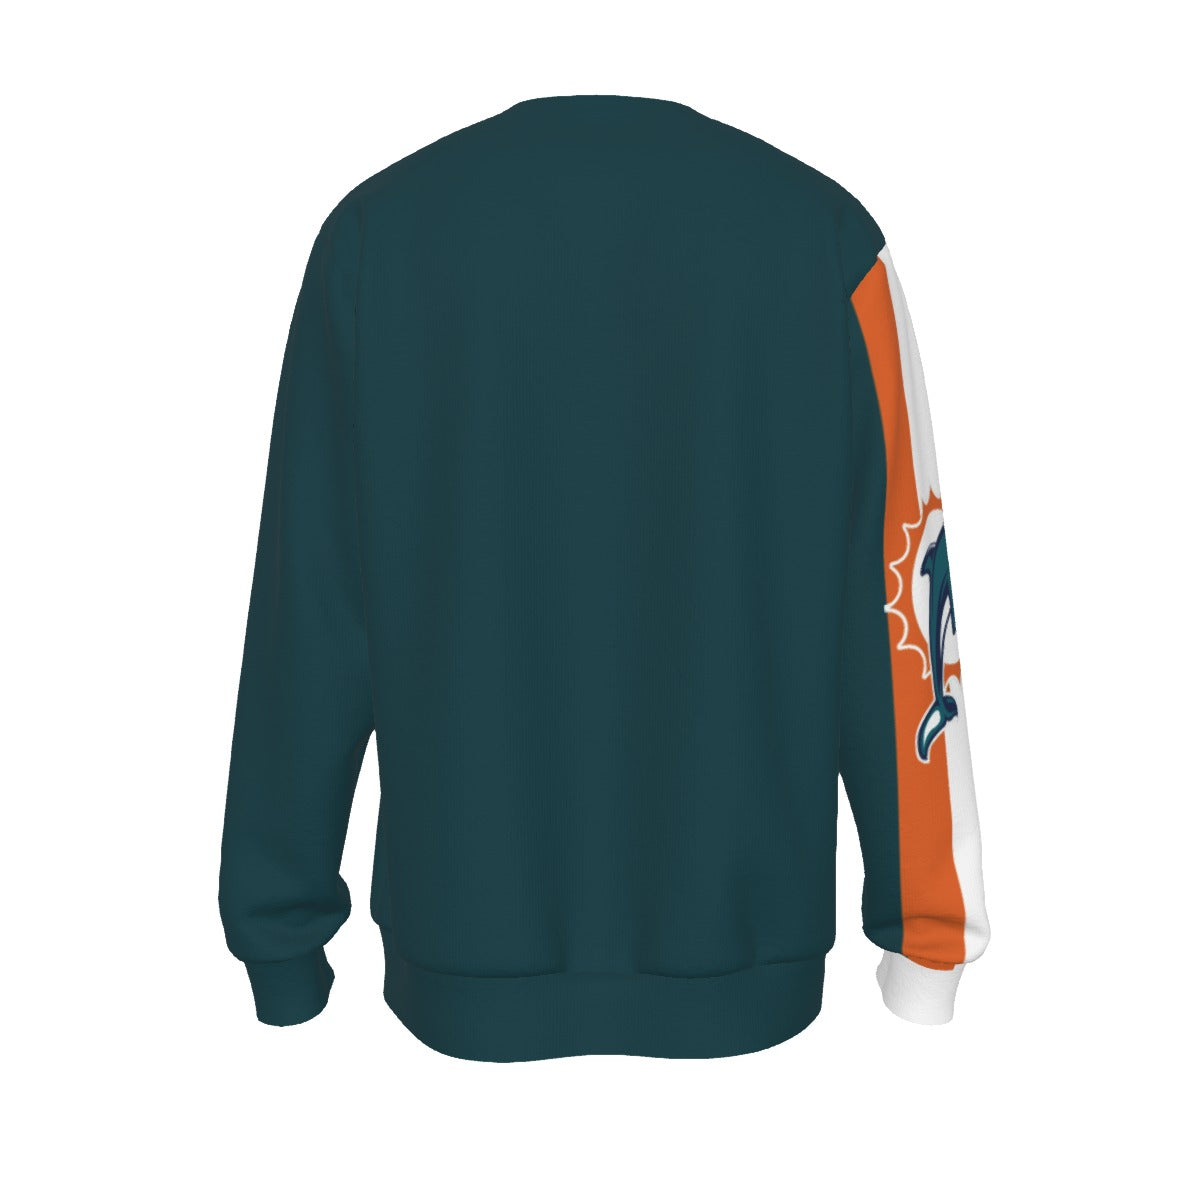 Miami Dolphins Game Day All-Over Men's Sweater